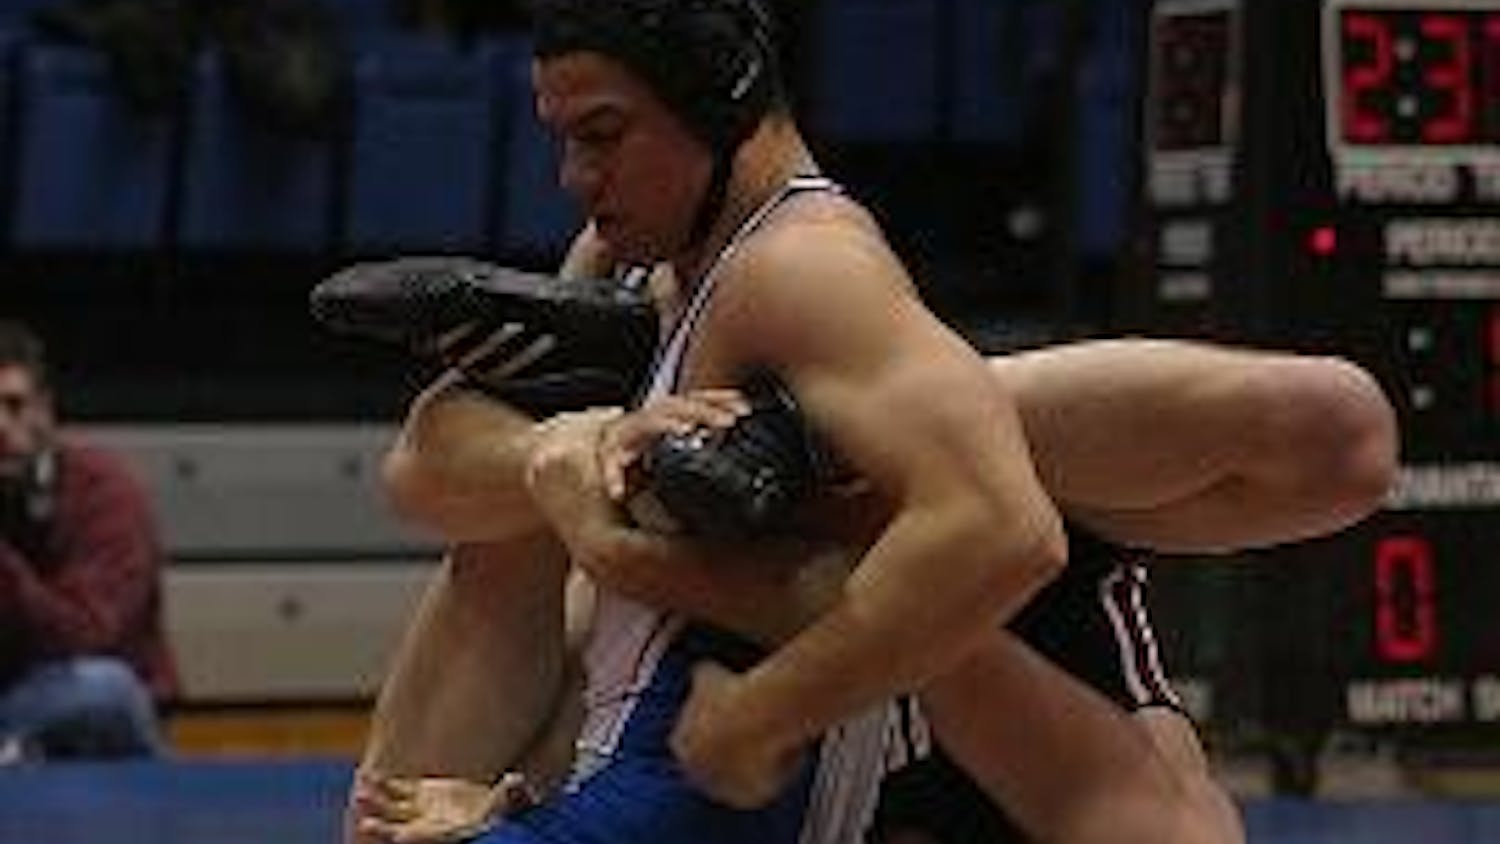 ALL KNOTTED UP - The Eagles were able to take down the Tar Heels in dramatic fashion over winter break with victories by juniors Kyle Borshoff and Mike Cannon.  Both wrestlers are ranked in the top-15 nationally, looking to win individual national champio